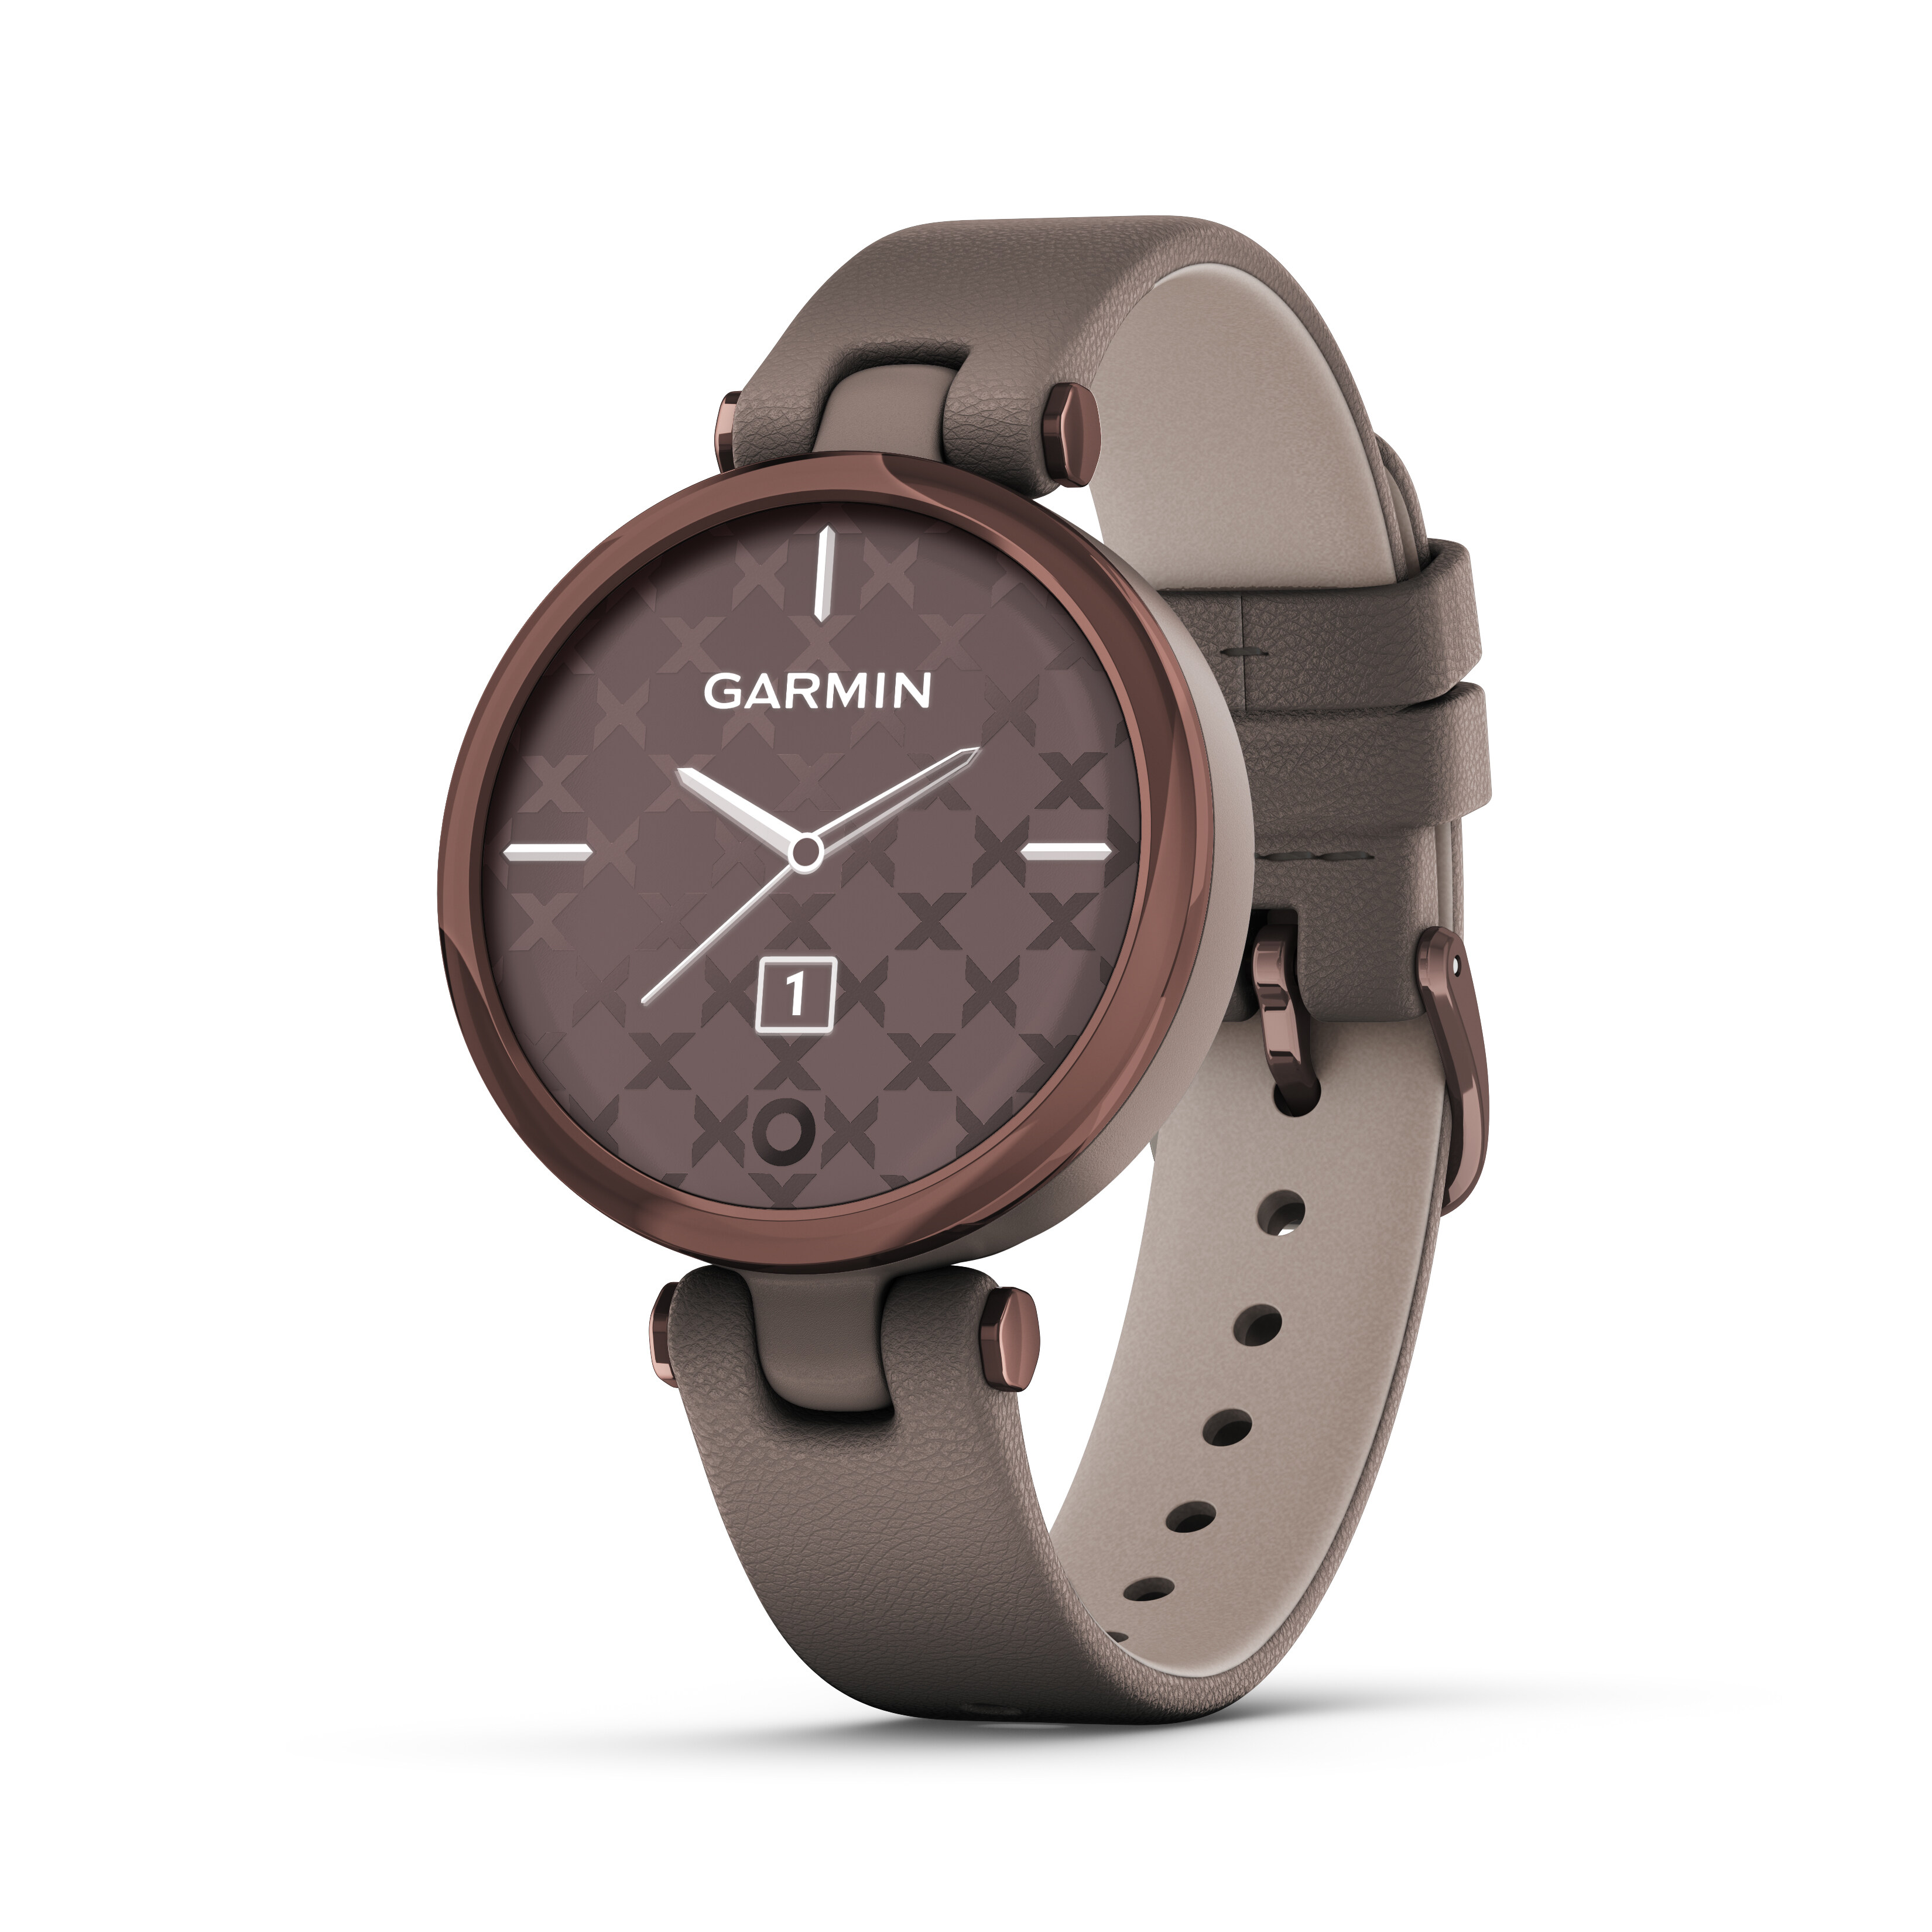 [NEW] Garmin Lily Smart Watch (Leather) - Stylish Patterned Lens, Smart Touchscreen, Small and Fashionable smartwatch